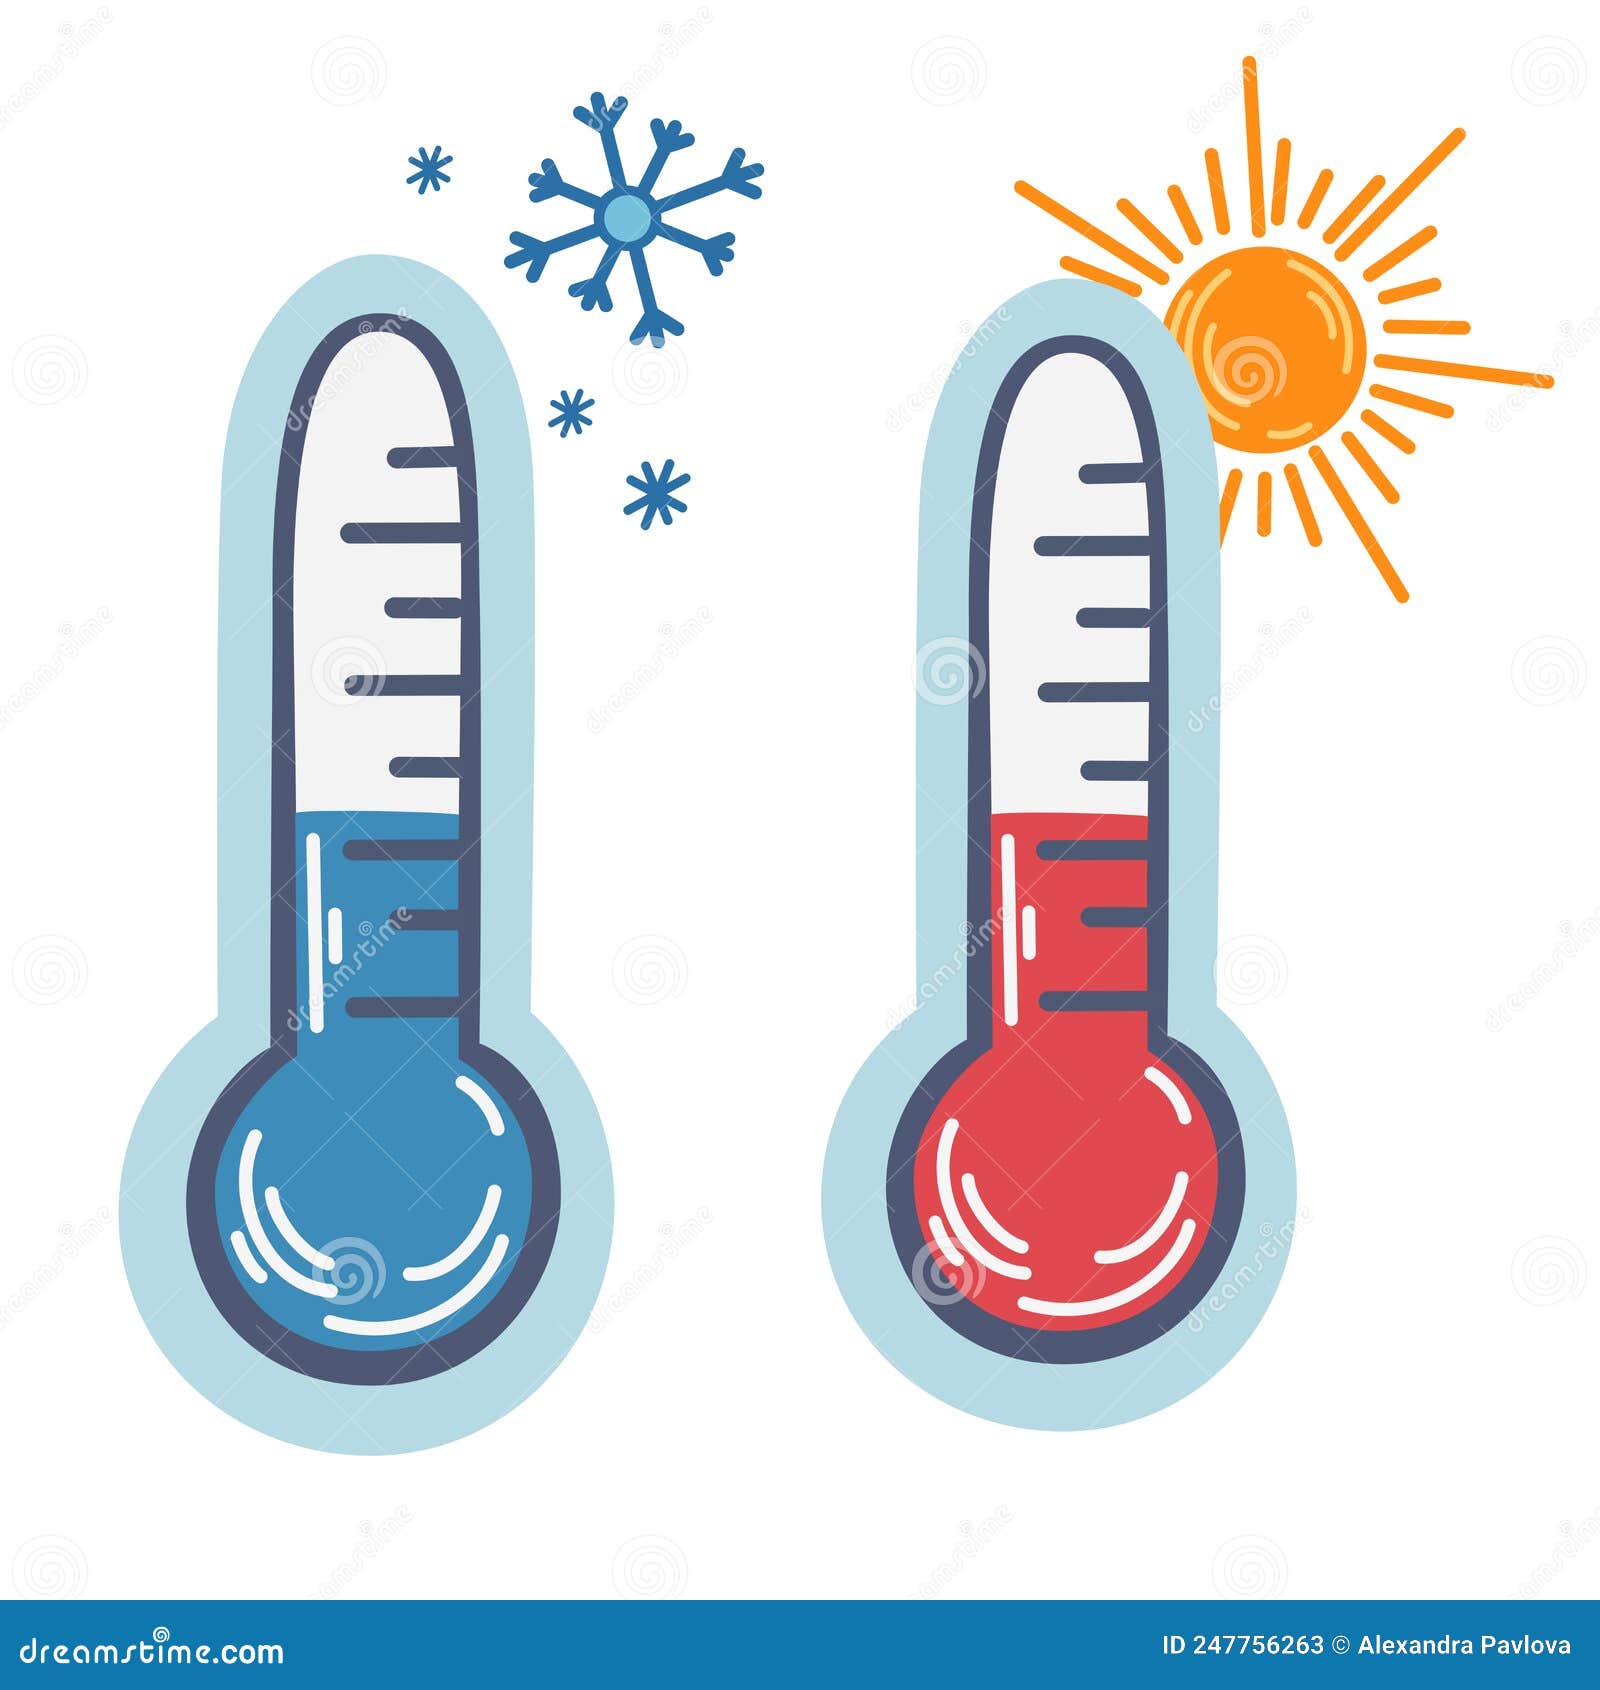 Weather thermometer. Warm and cold temperatures. Vector illustration., Stock vector